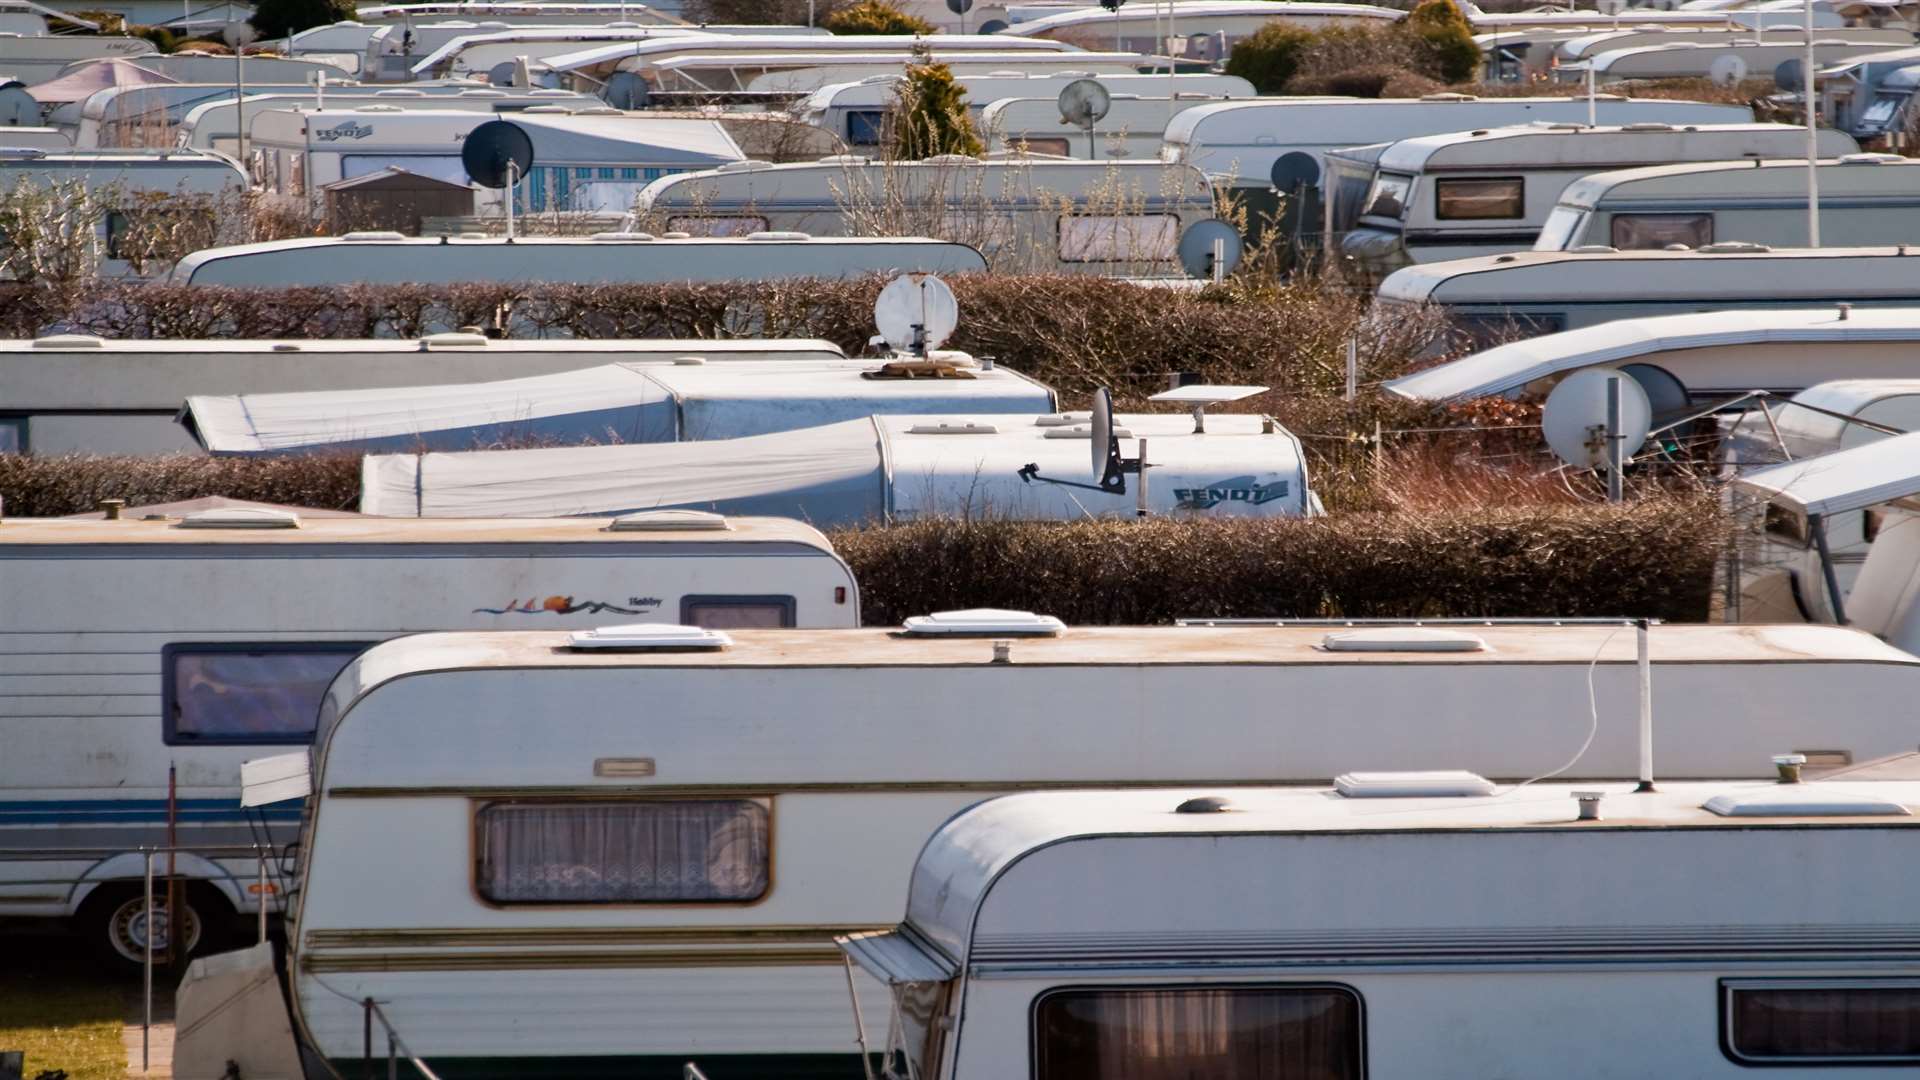 Caravans have pitched up on Castle Way. Stock image.